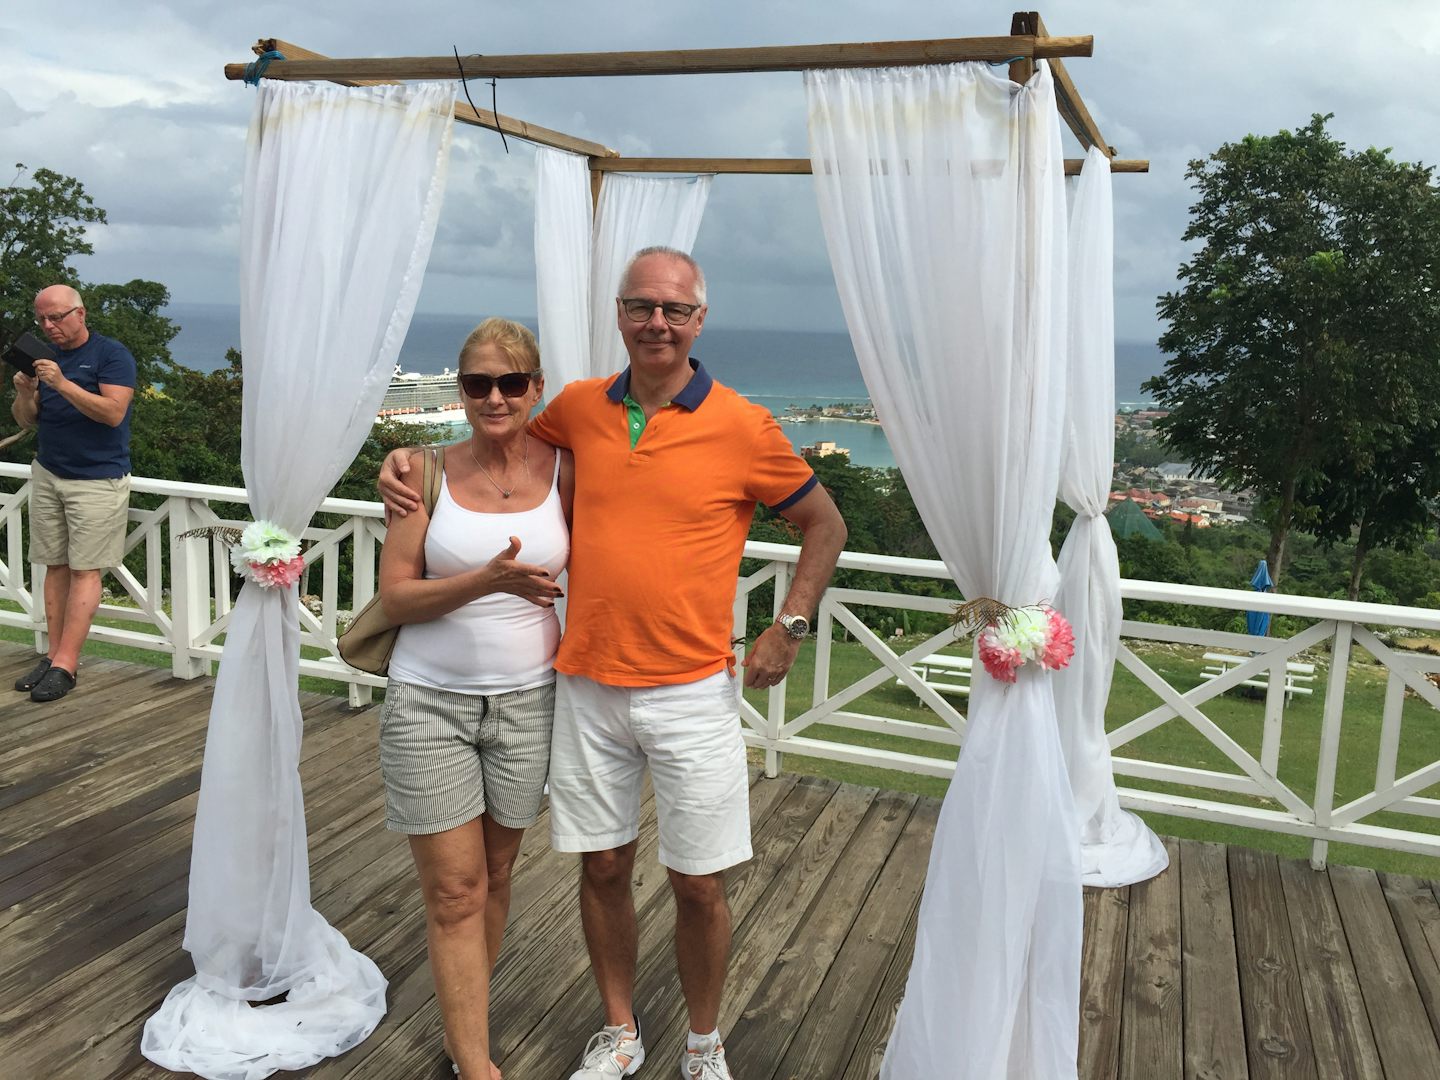 Me and my wife at Ocho Rios, Jamaica, with Celebrity Reflection in the back ground. We loved our week on board. The service was perfect and the food delicious. Very elegant furnishings over all and in the staterooms.